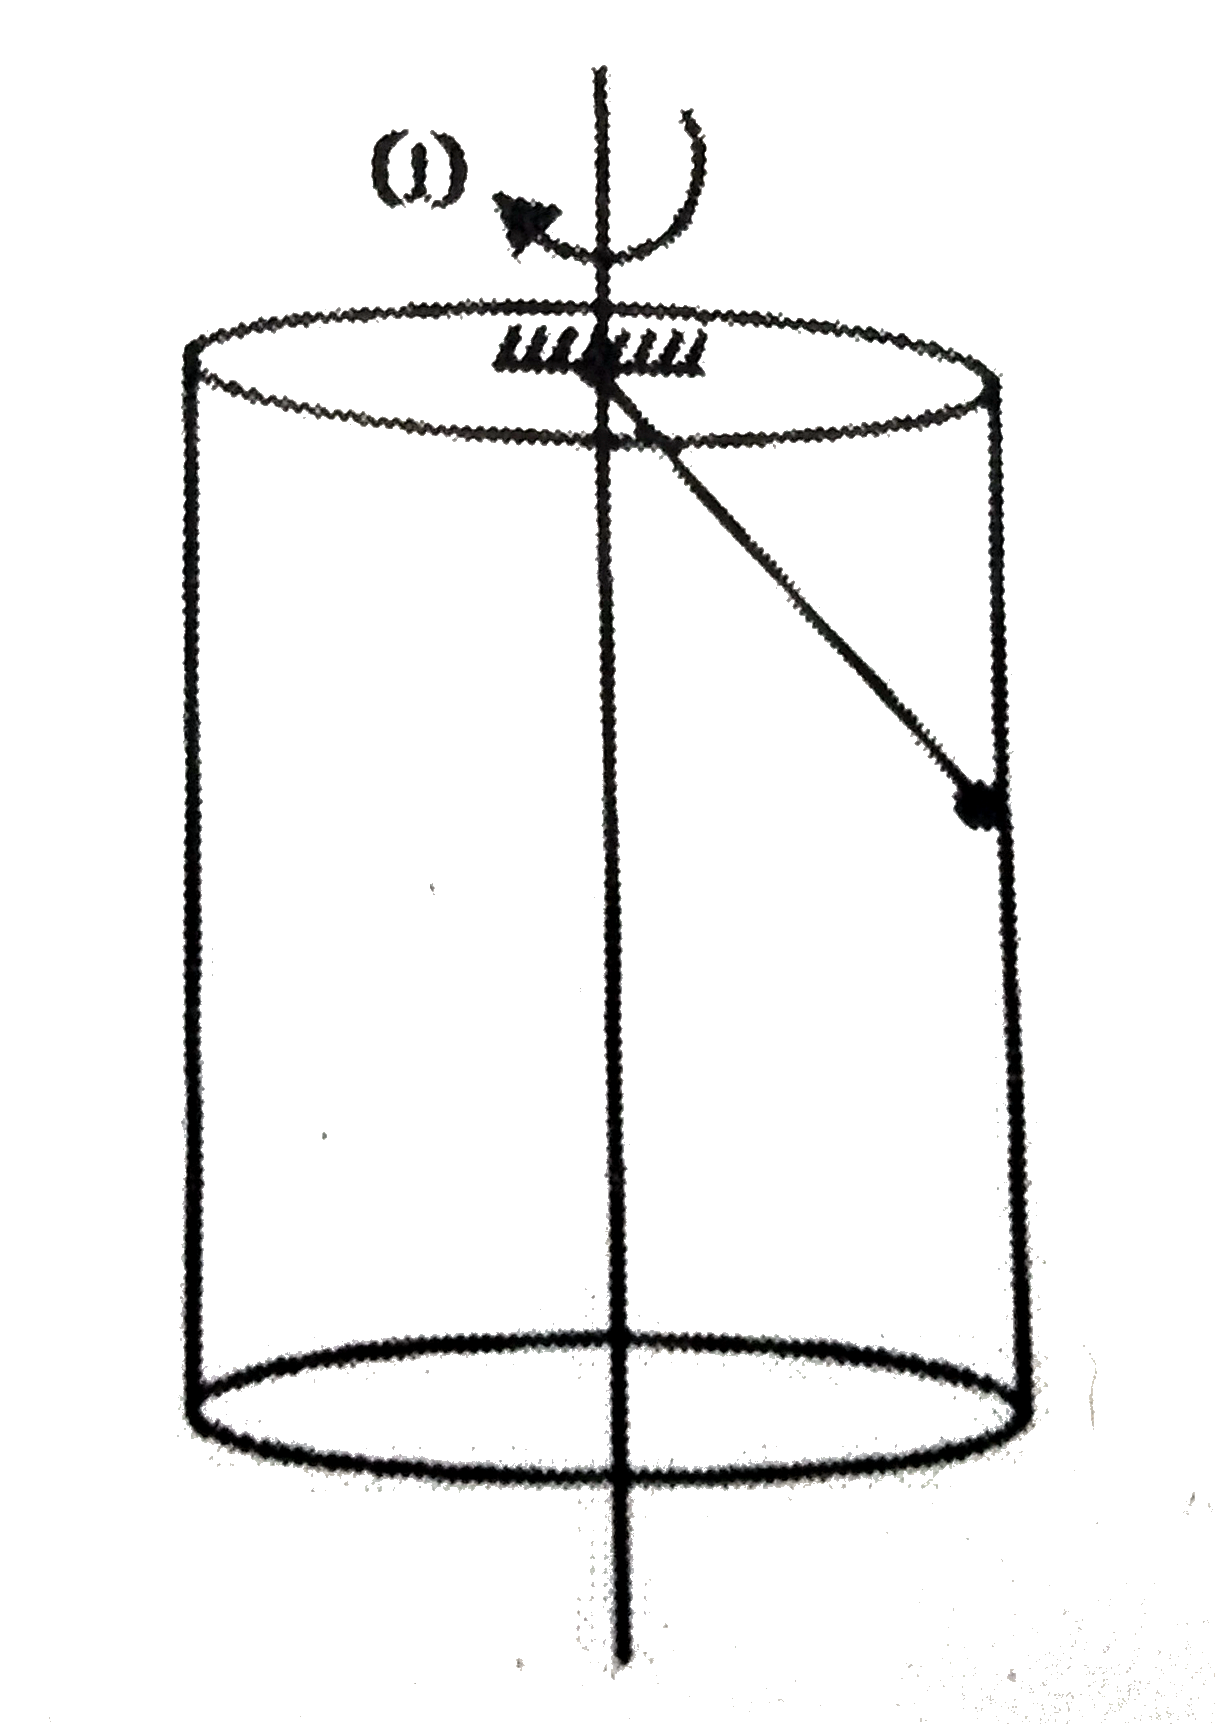 In the shown figure inside a fixed hollow cylinder with vetical axis a pendulumm is rotating in a conical path with its axis same as that of the cylinder with uniform angular velocity. Radius of culinder is 30cm, length of string is 50cm and mass of bob is 400gm. The bob makes contact with the inner fricitonless wall of the cylinder while moving